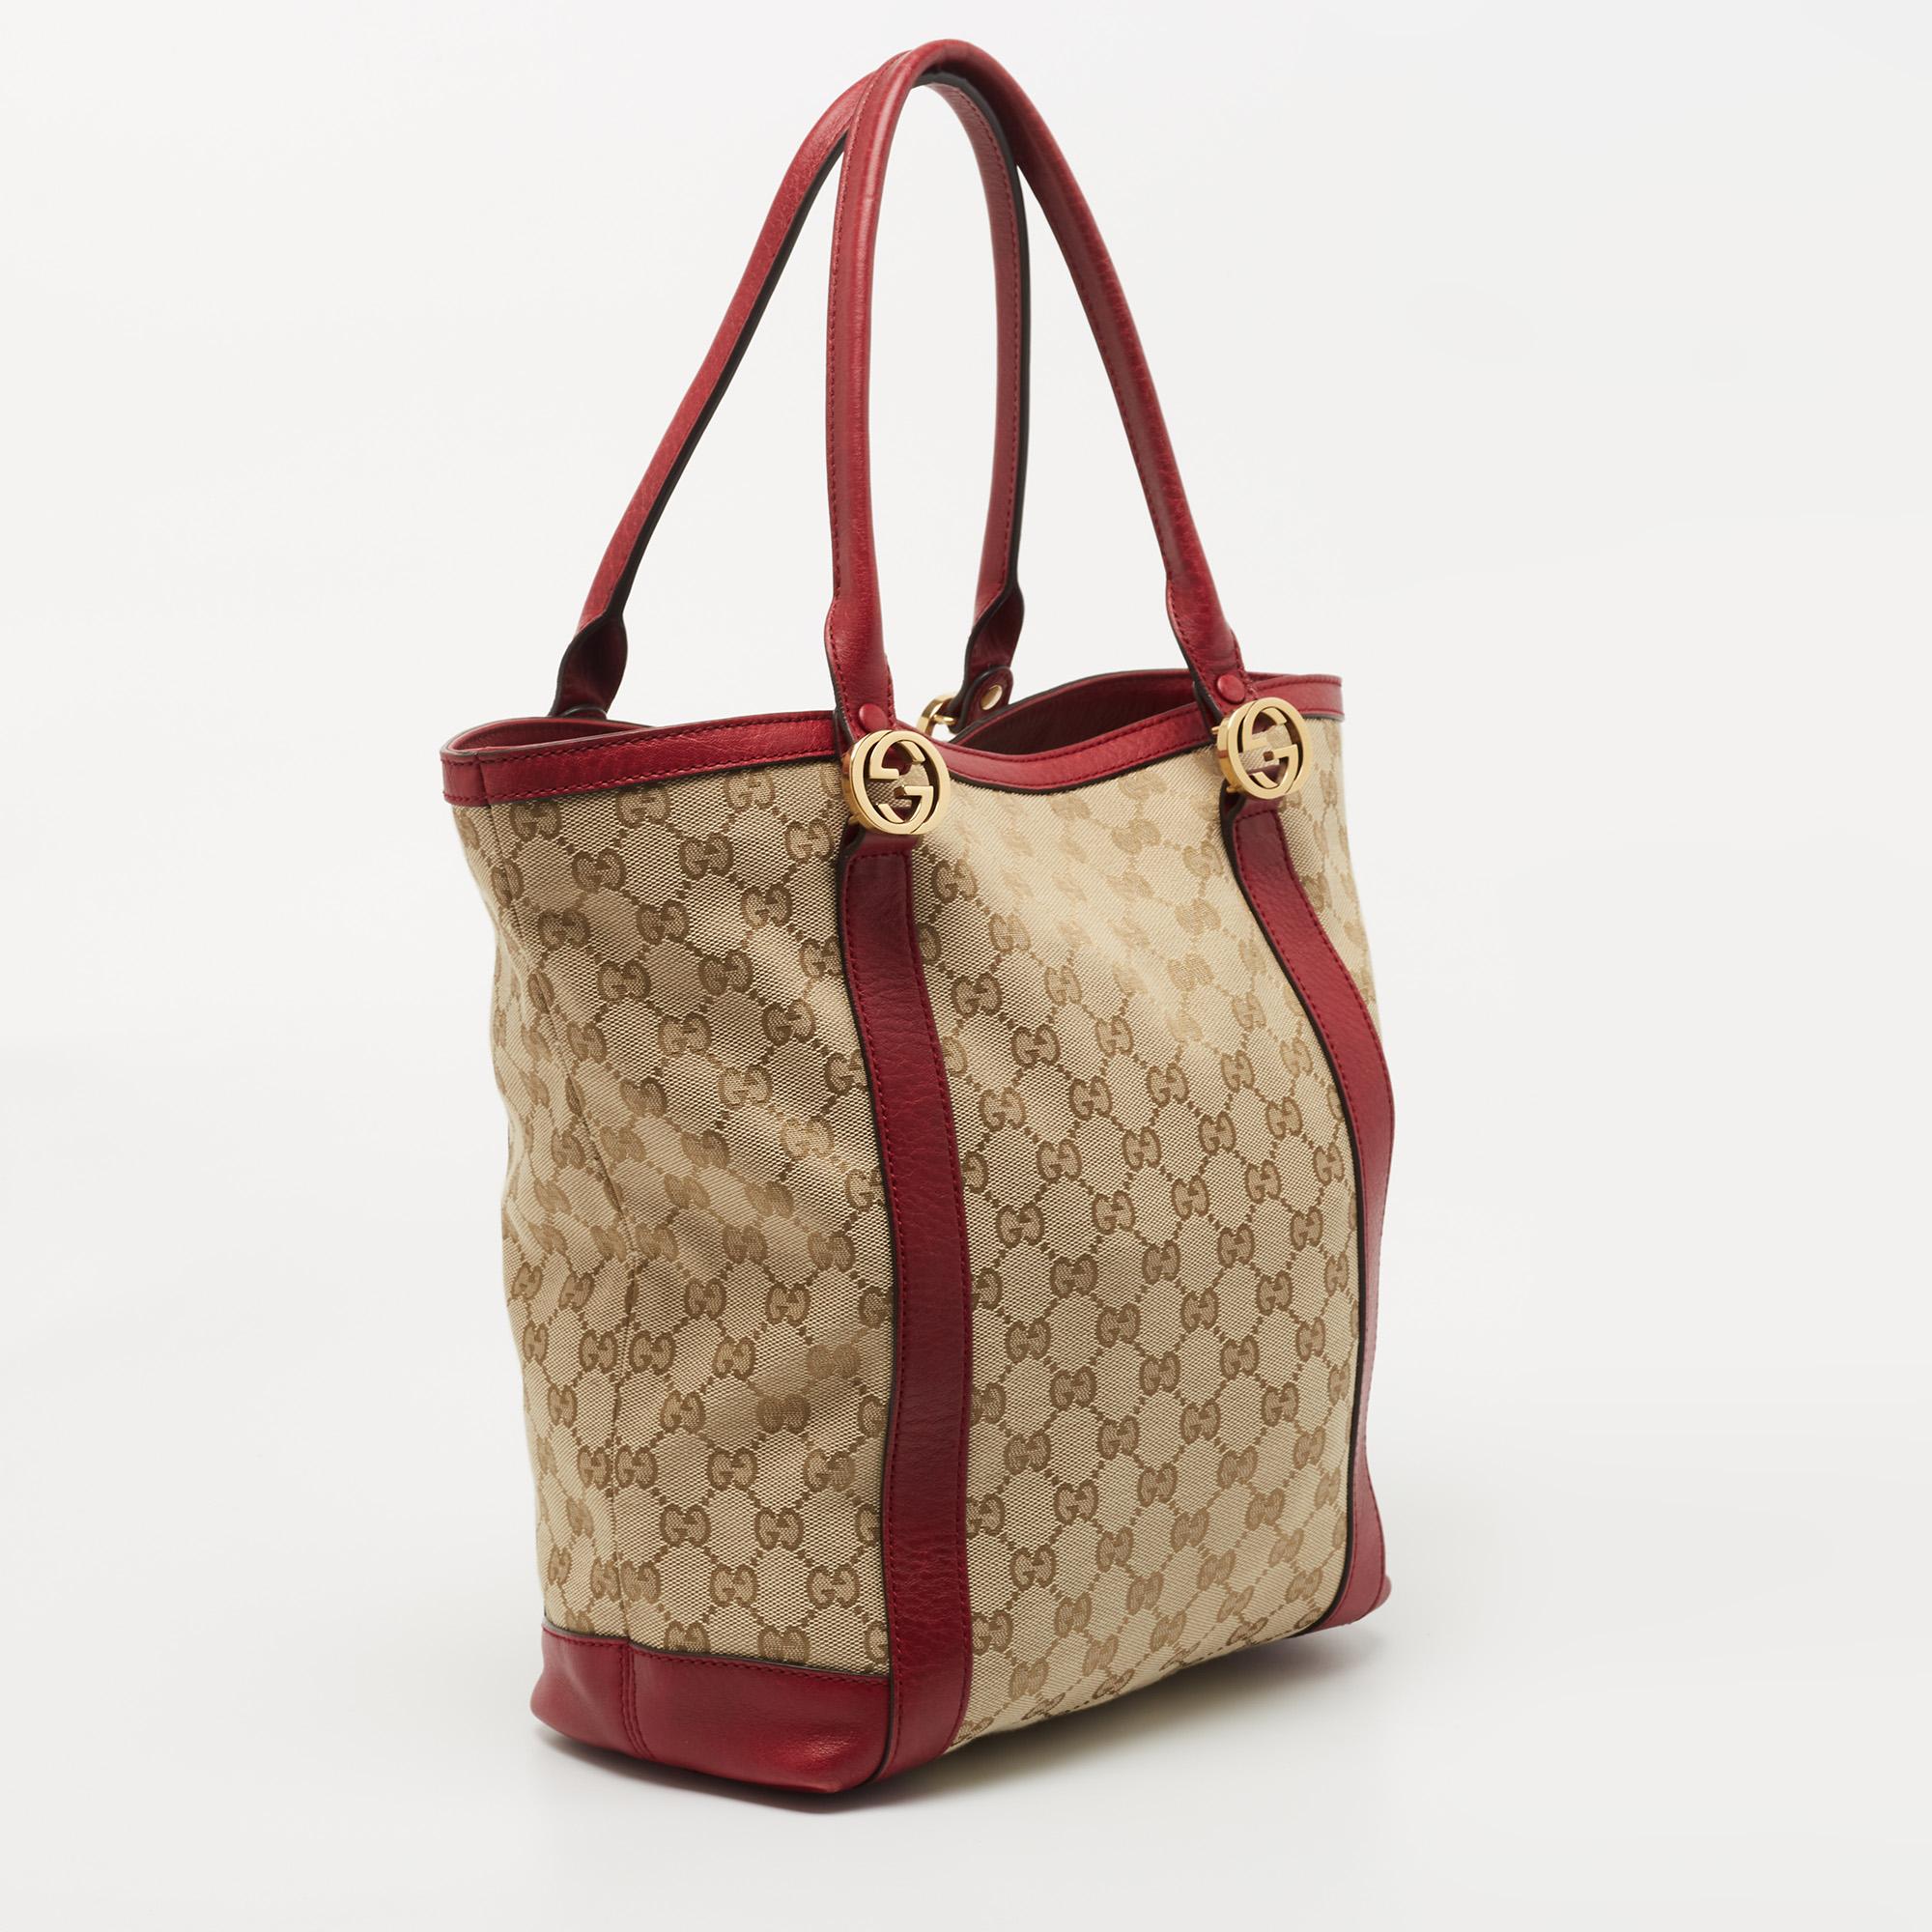 Women's Gucci Beige/Red GG Canvas and Leather GG Interlocking Shopper Tote